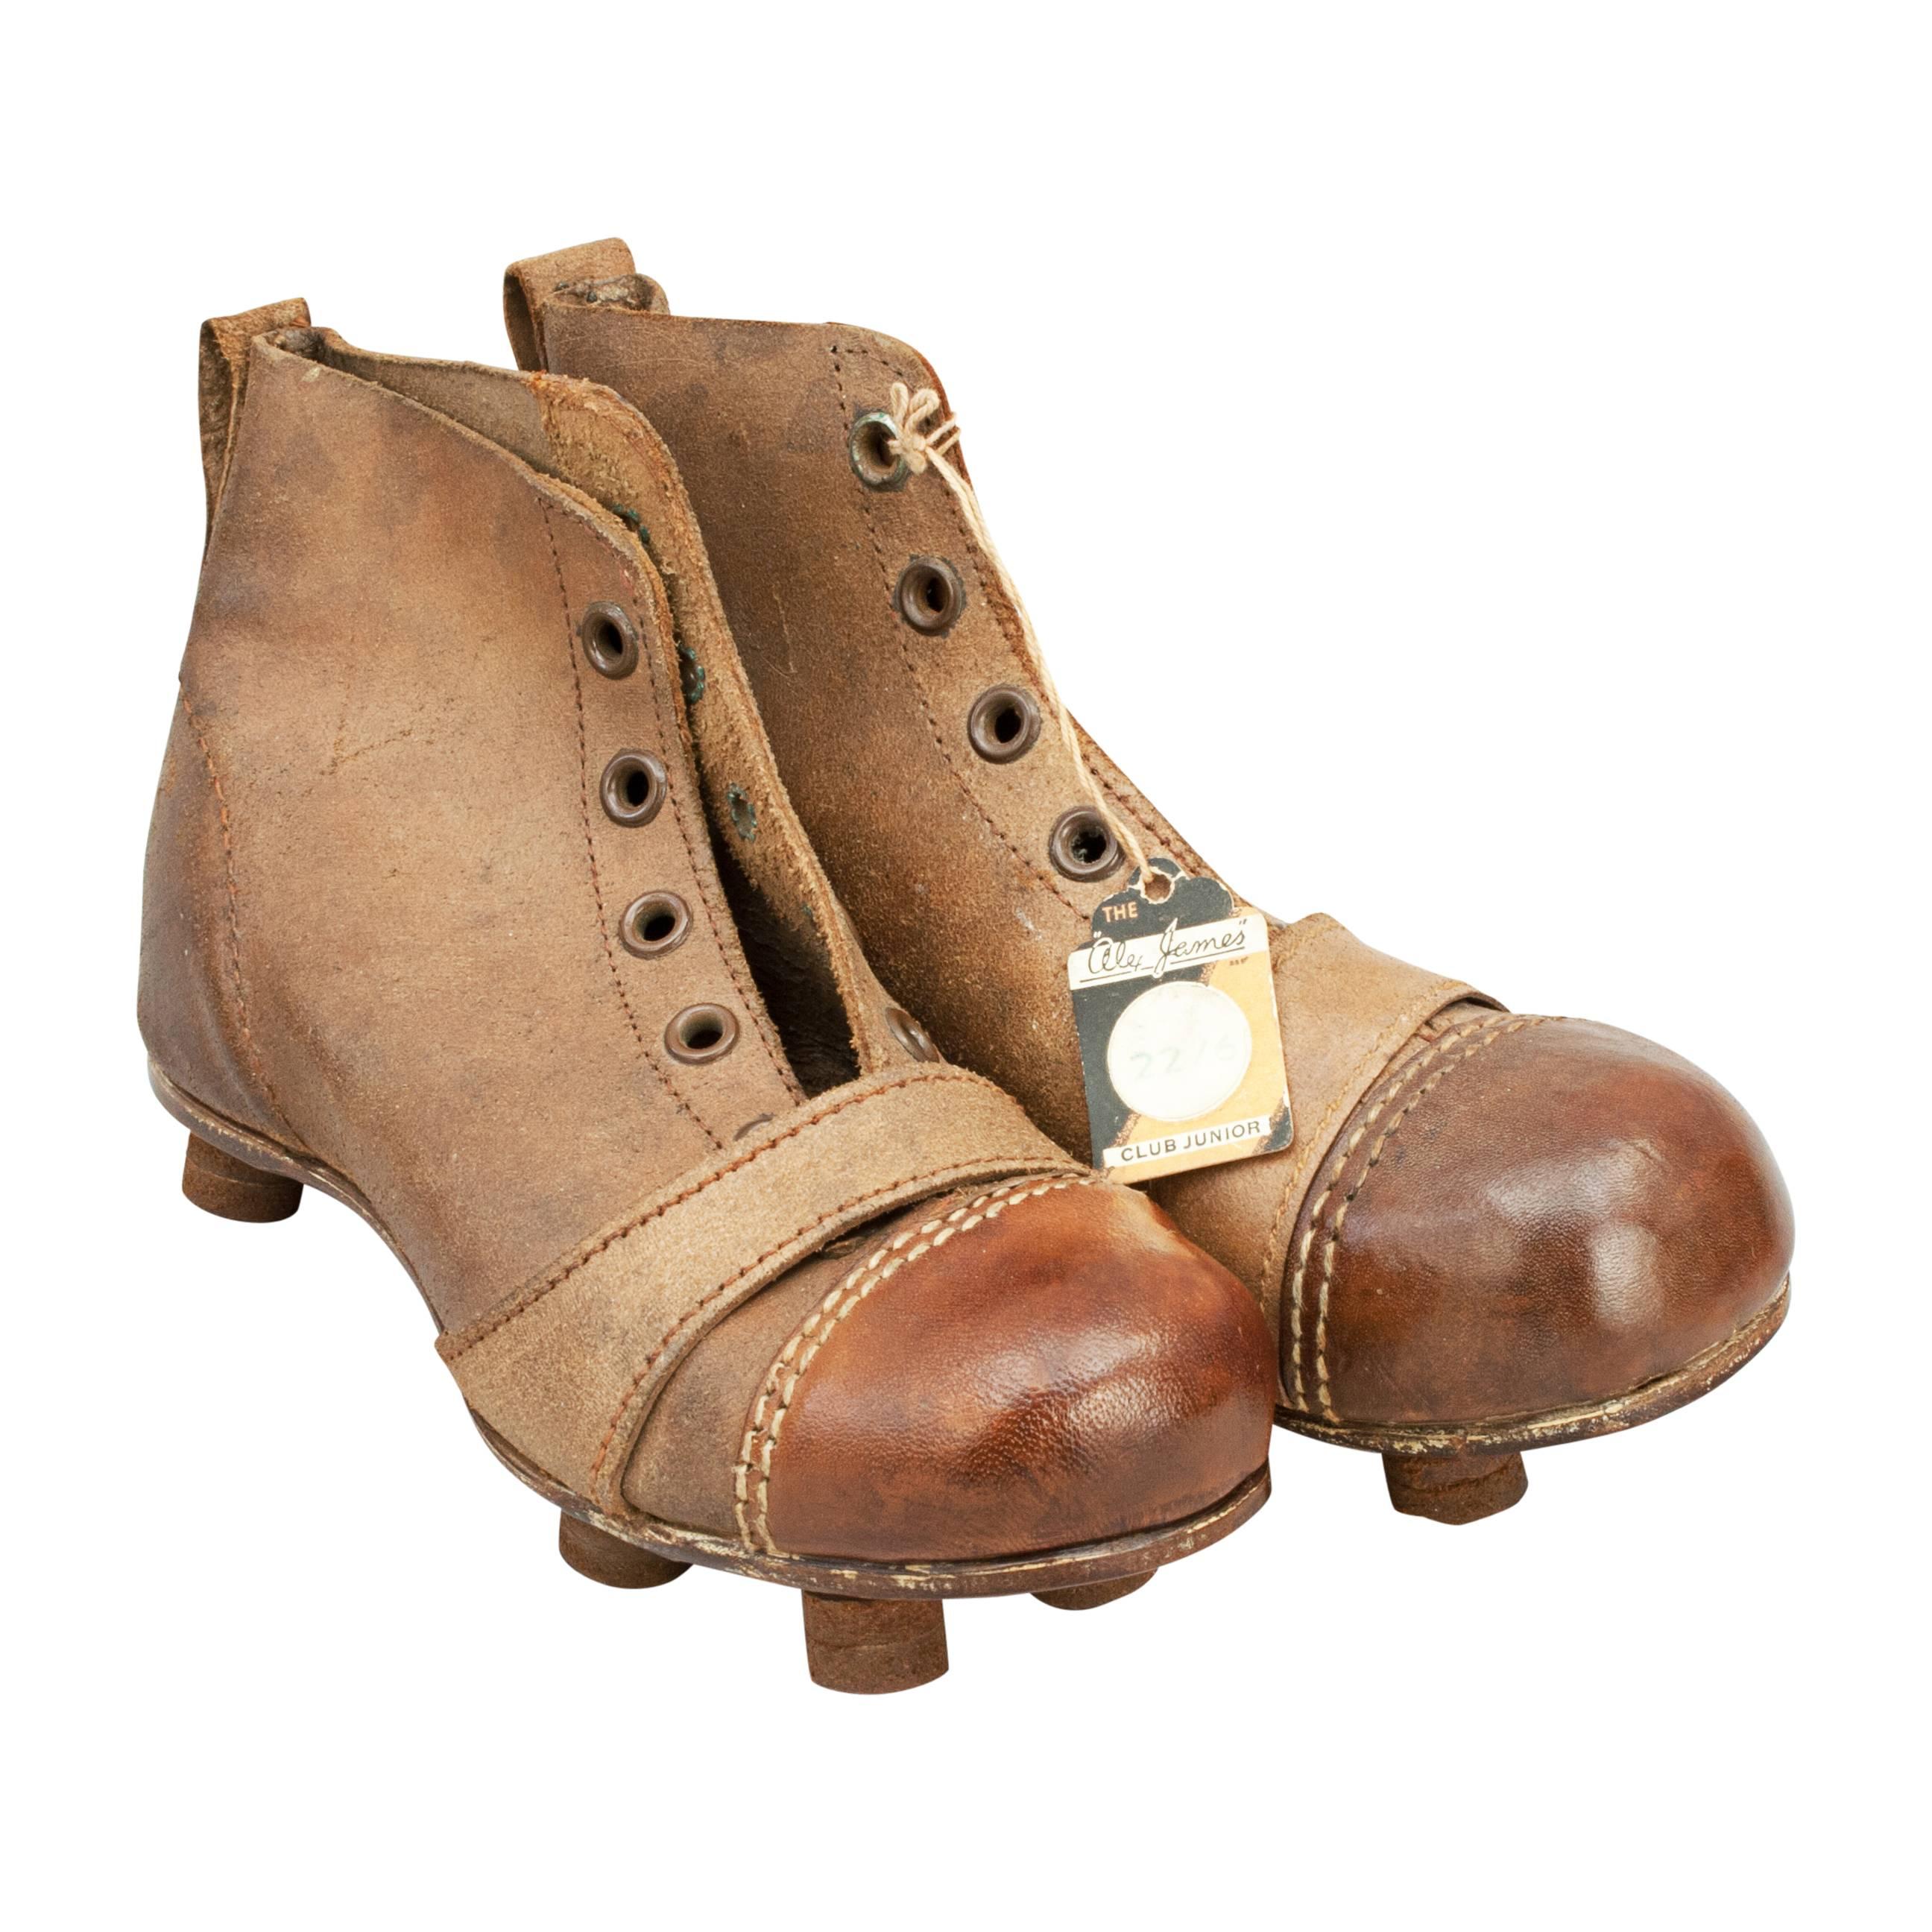 Vintage pair of child's leather football boots.
A pair of size 11 unused junior leather football boots. Stamped on the sole with size 11 'The Alex James' with 'Alex James Club Junior' paper label. The toe area on the boots are made of hardened